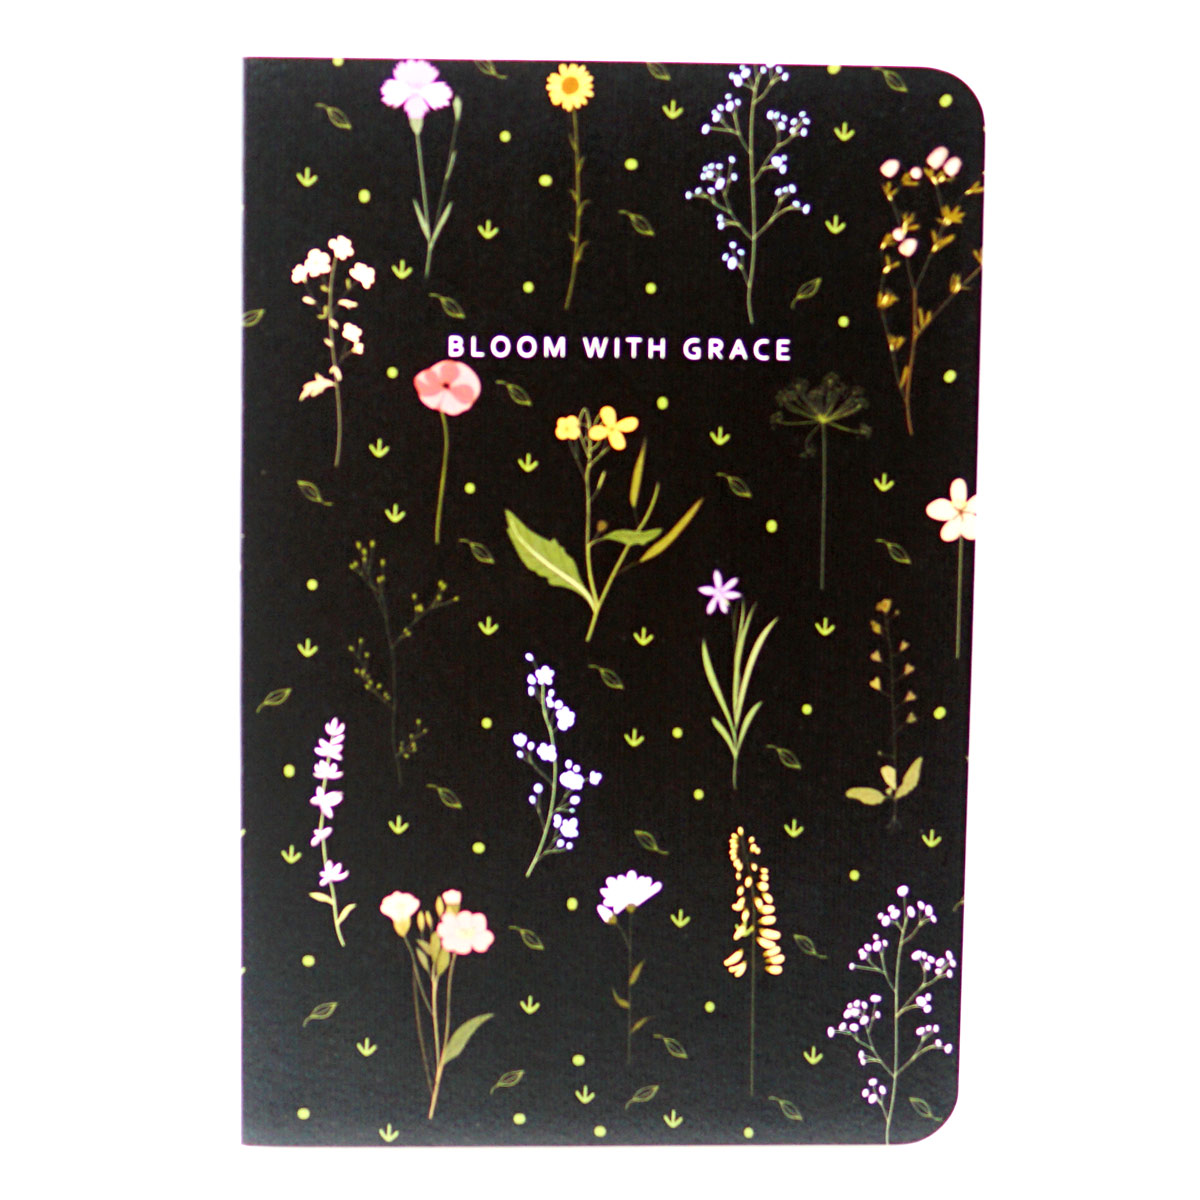 Factor A5 Black Color Blossom with Bloom Design Soft Bound Ruled Notebook 90 GSM With 160 Pages SKU 50186